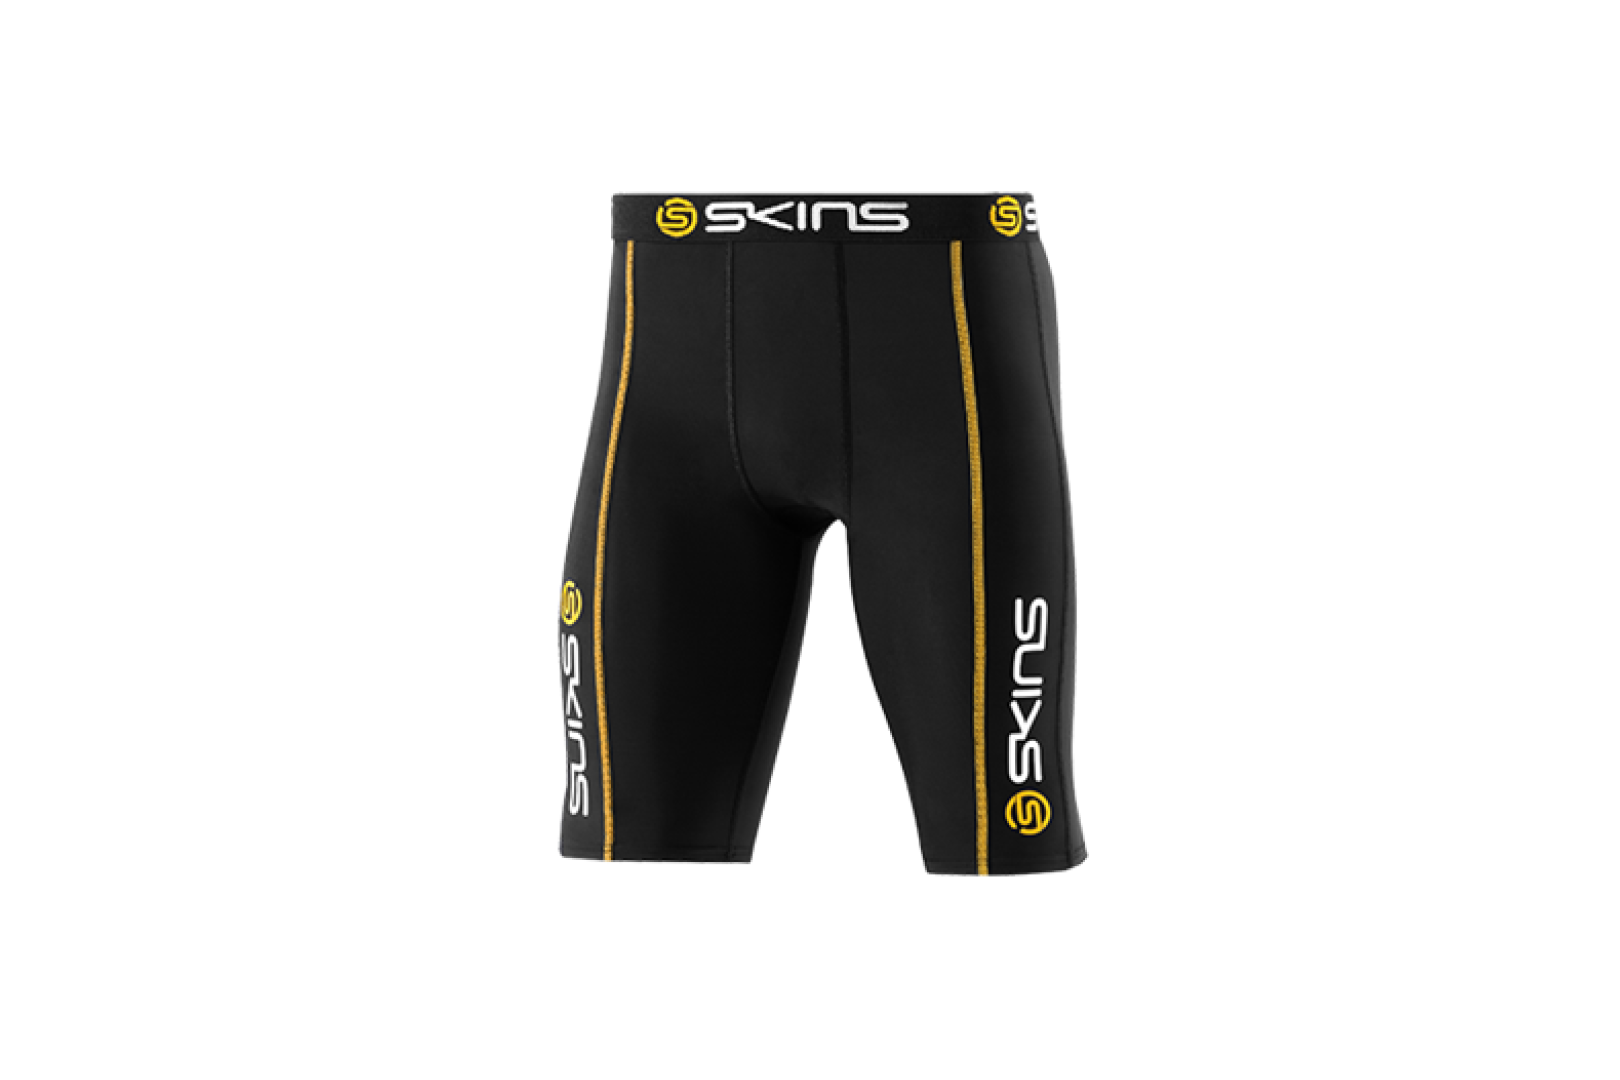 SKINS A400 Compression Tights Review